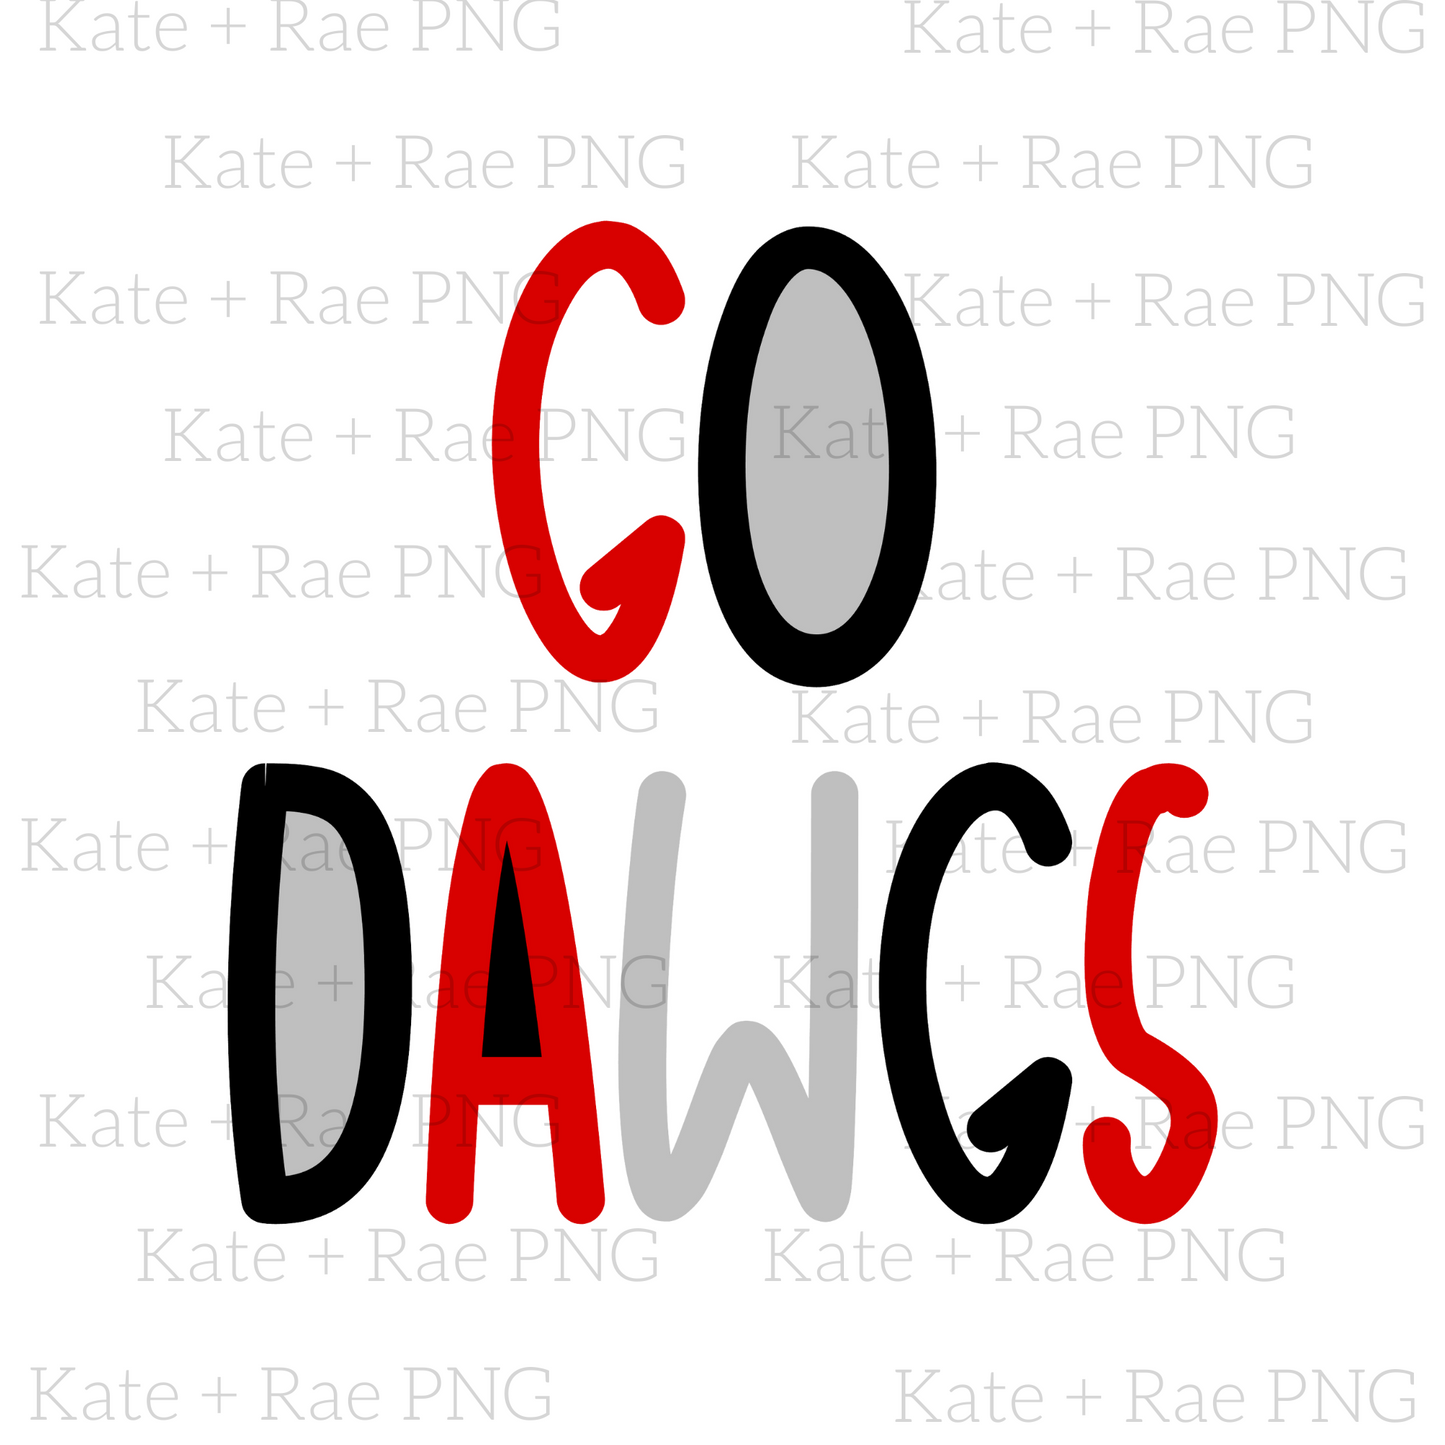 Go Dawgs Two Toned PNG